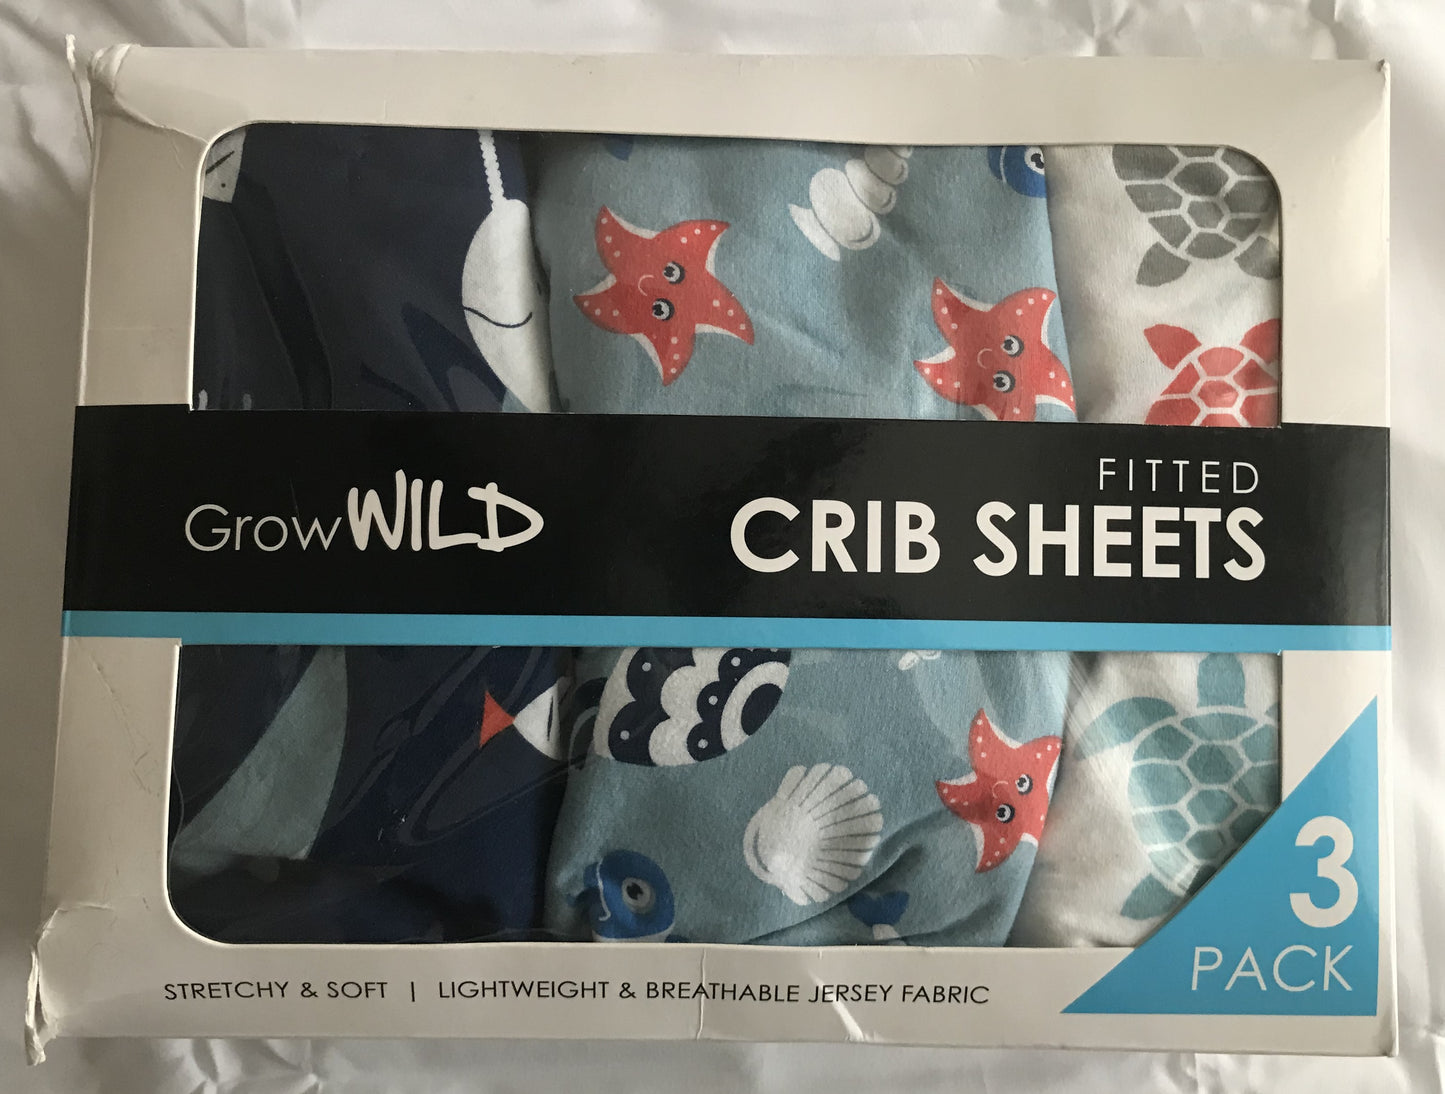 Grow Wild- Fitted Crib Sheets 3 pack